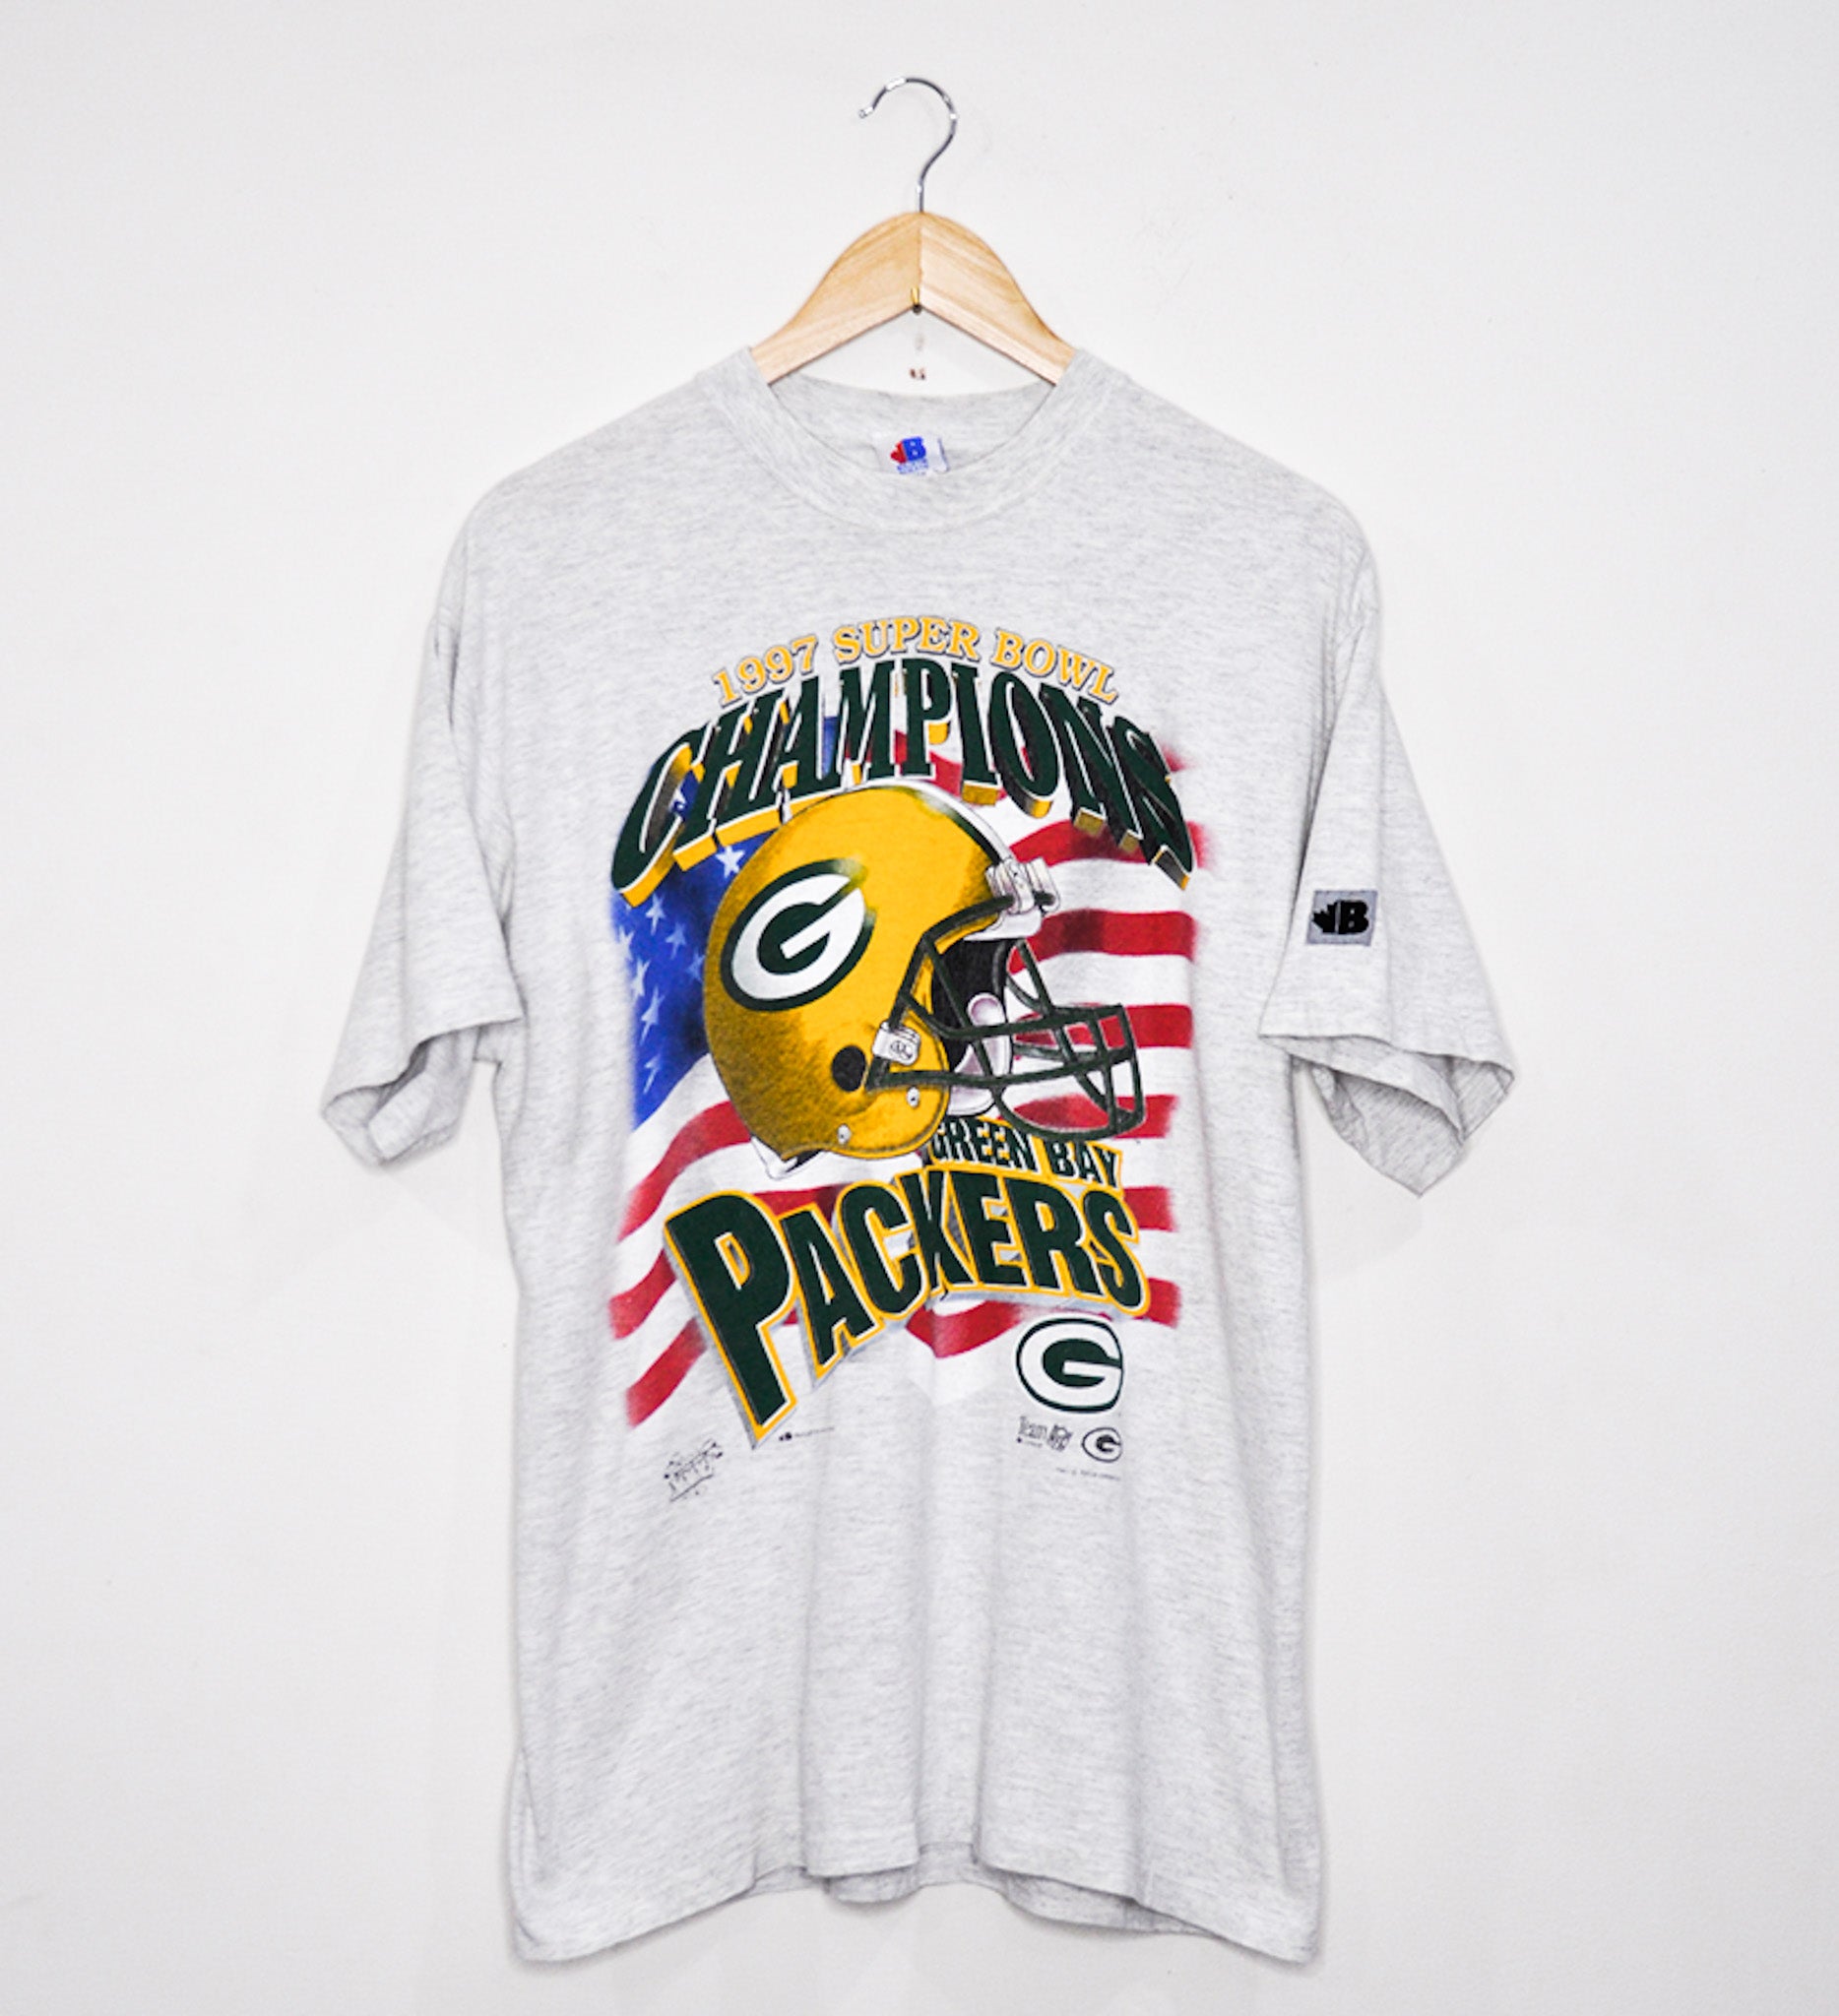 GREEN BAY PACKERS "1997 Super Bowl Champions" TEE